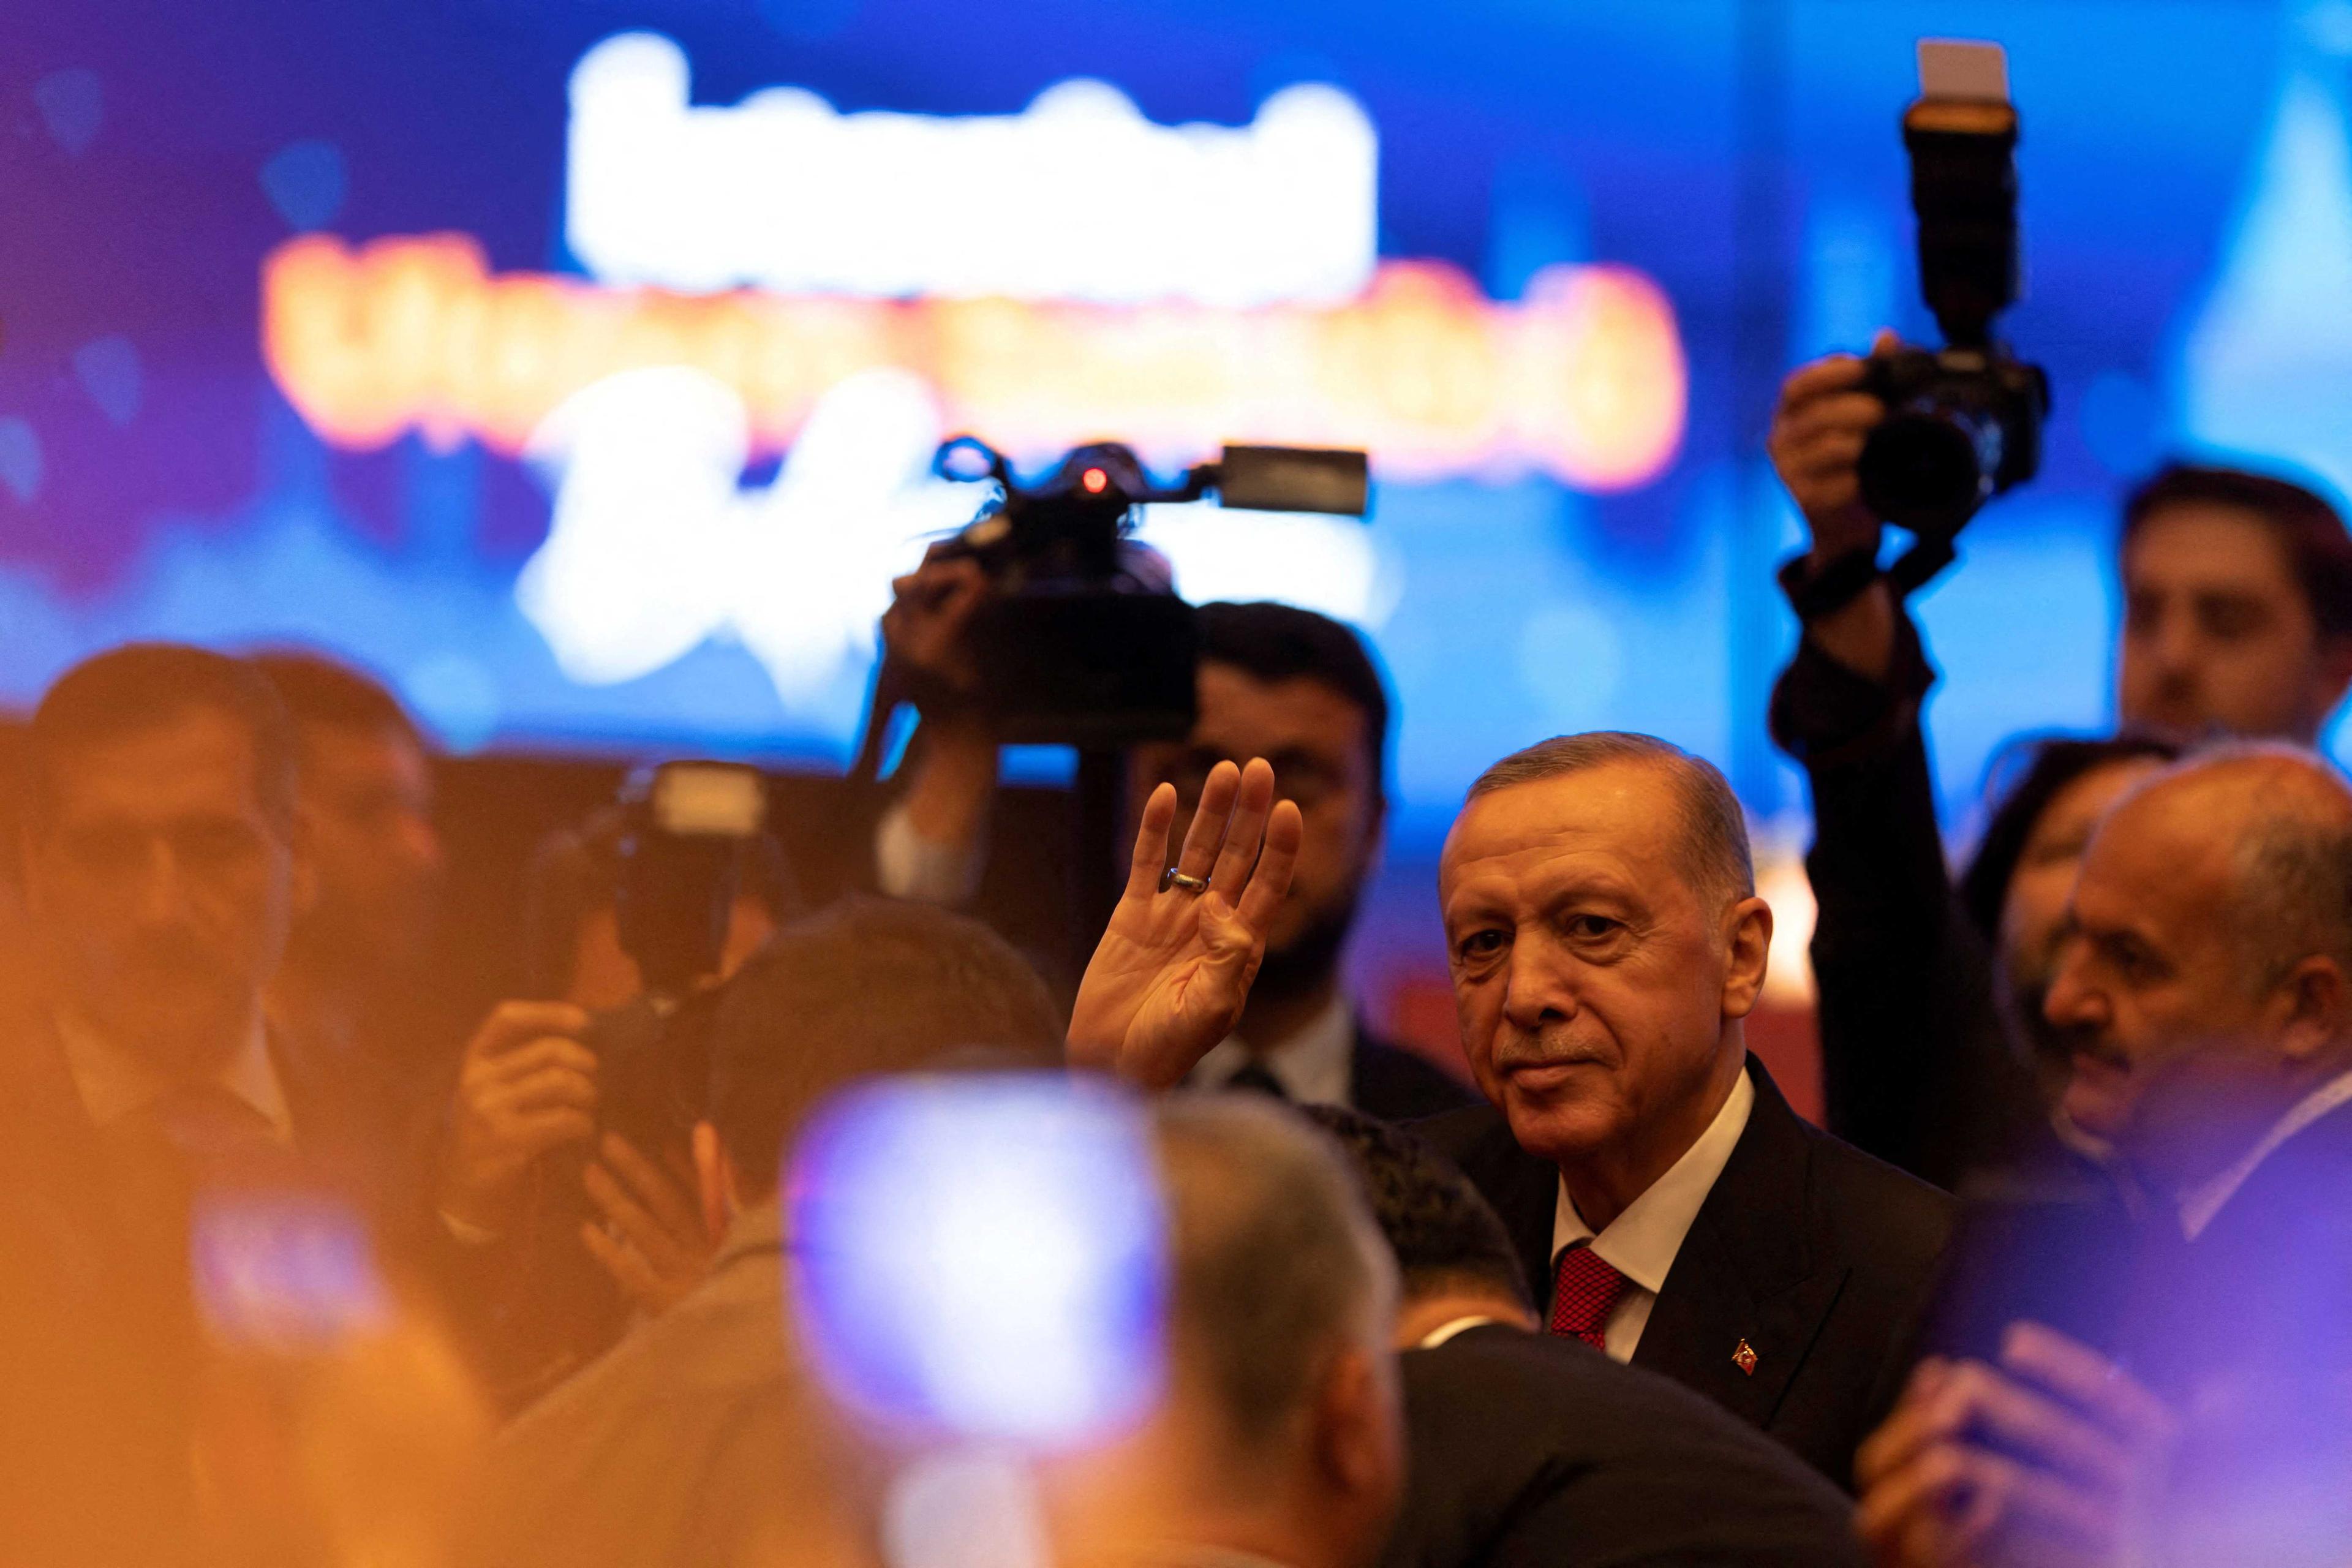 Turkish President Tayyip Erdogan greets his supporters as he arrives for a meeting in Istanbul, Turkey, May 18. Photo: Reuters